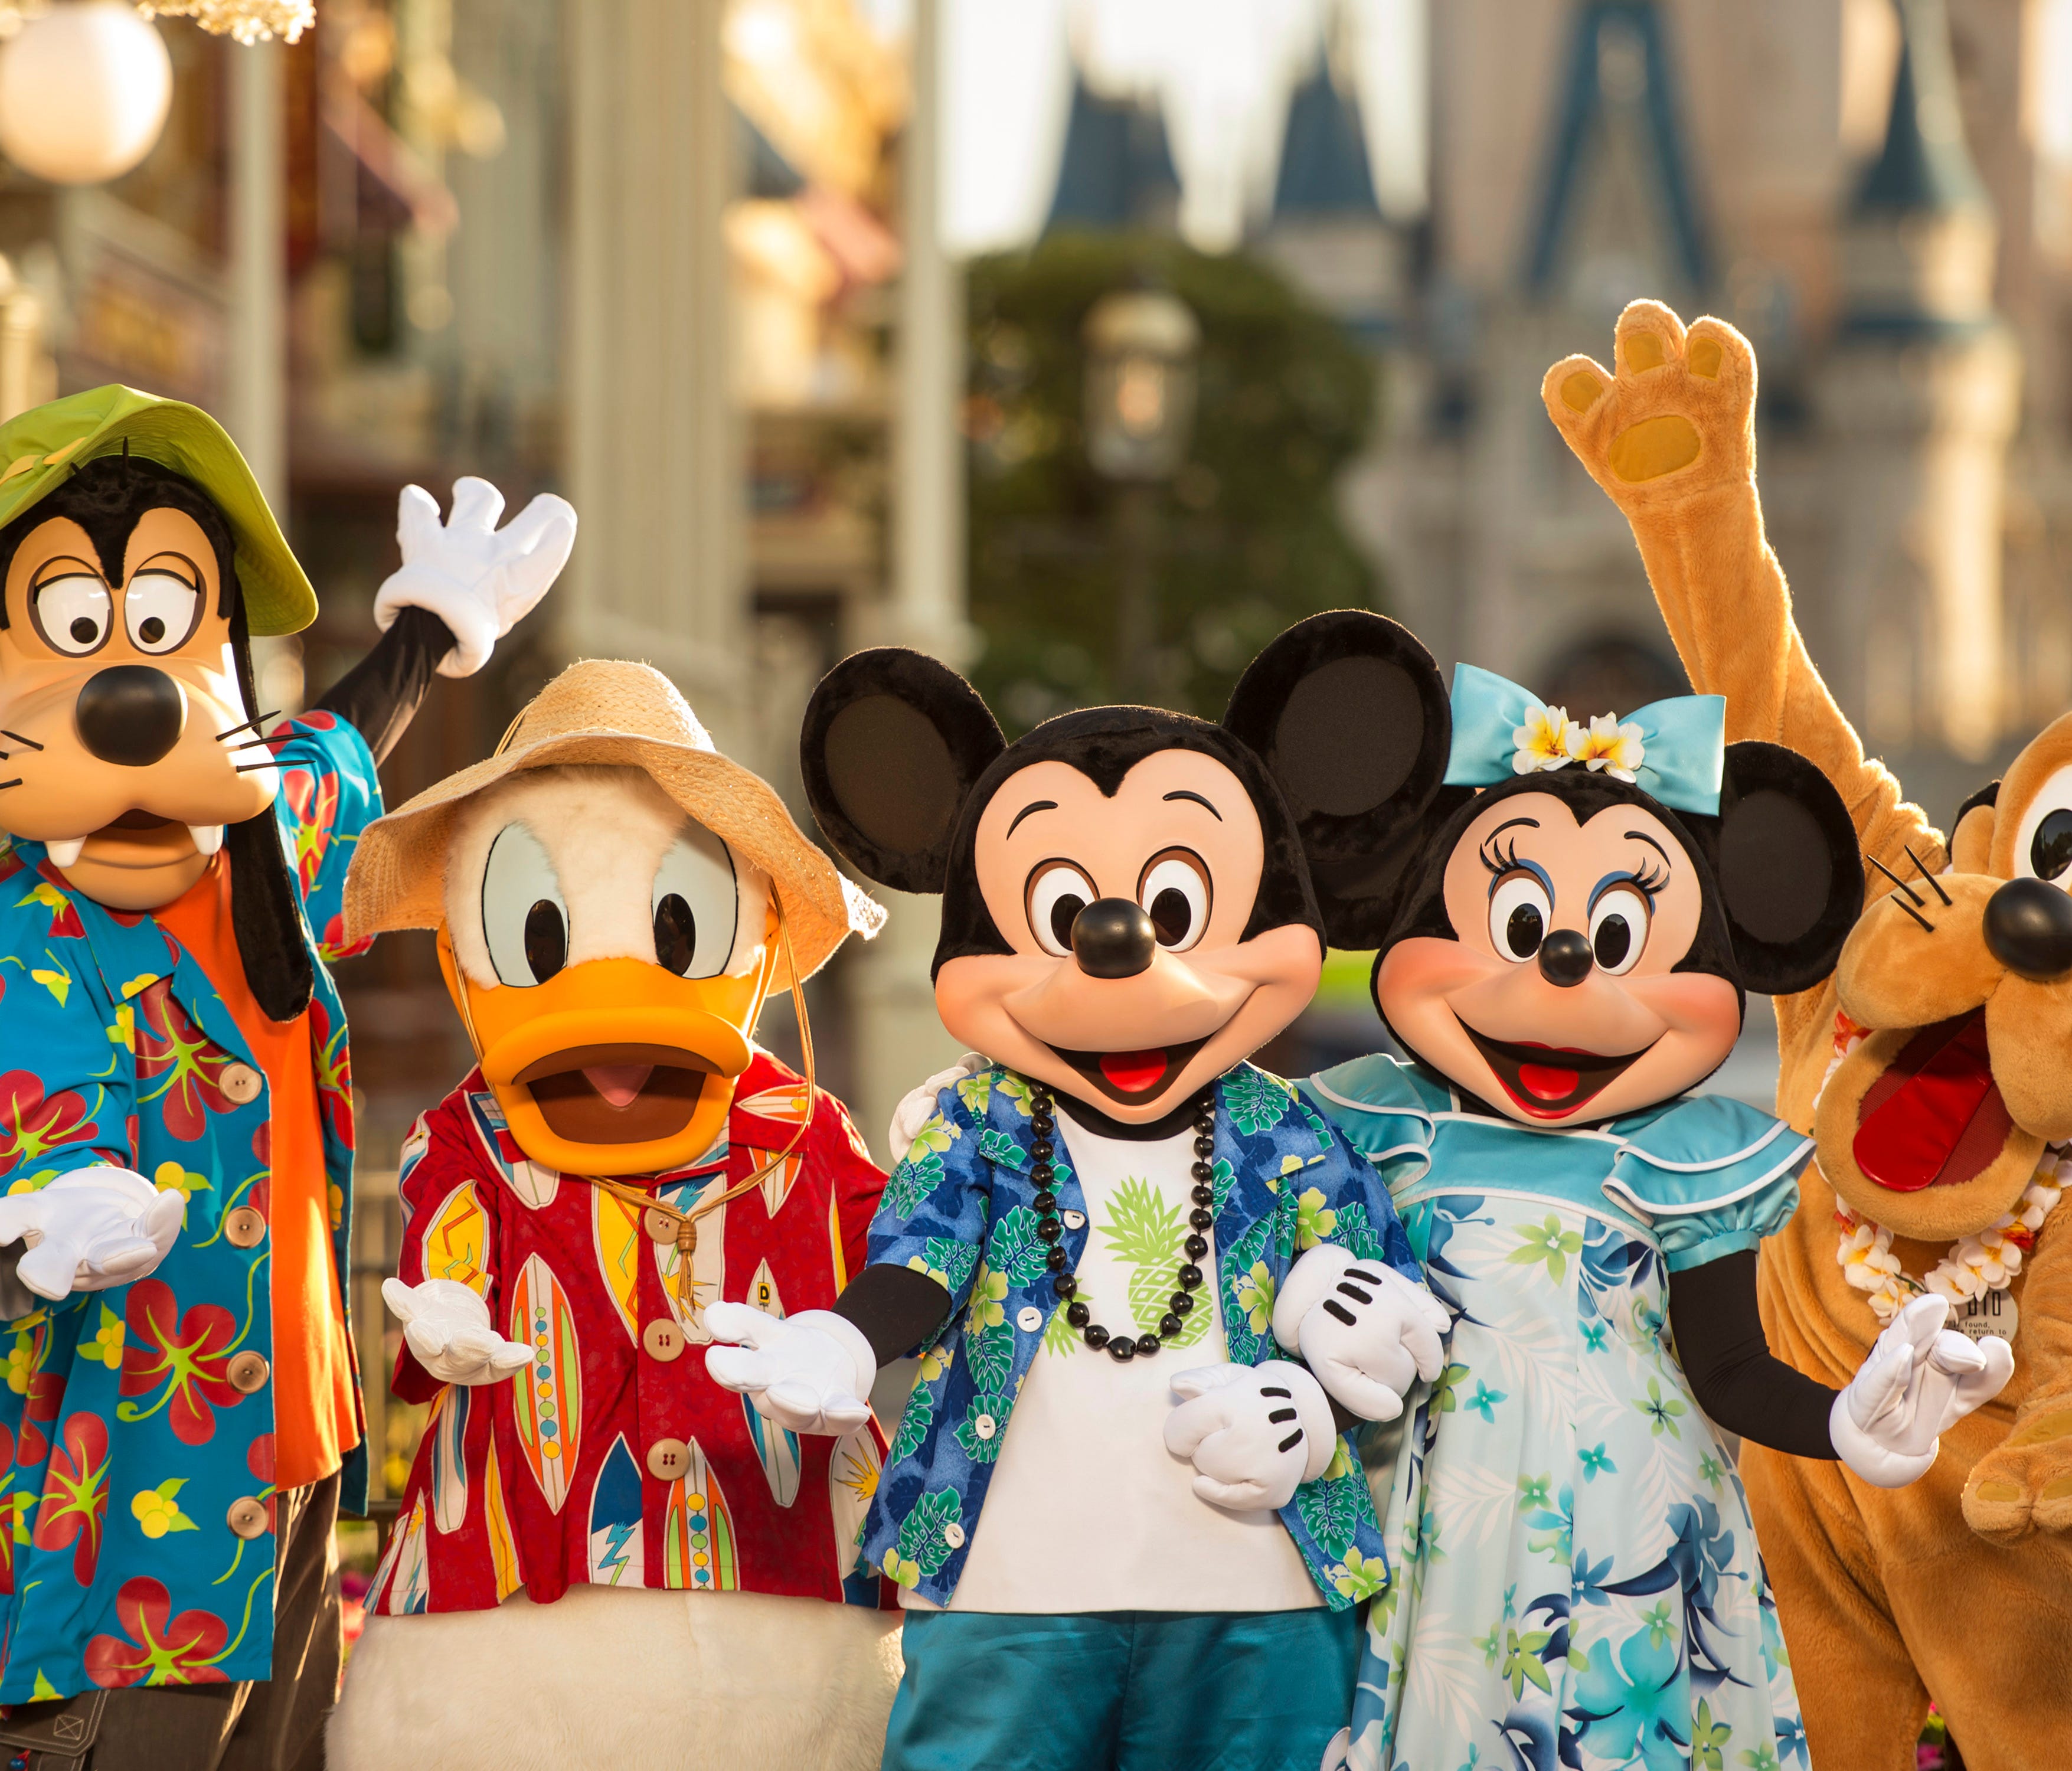 Walt Disney World Resort guests can chill out all summer long with cool thrills in the four Disney theme parks, spills at the two Disney water parks, Disney Character encounters, shopping, dining and many other unforgettable experiencesÑlike Frozen S